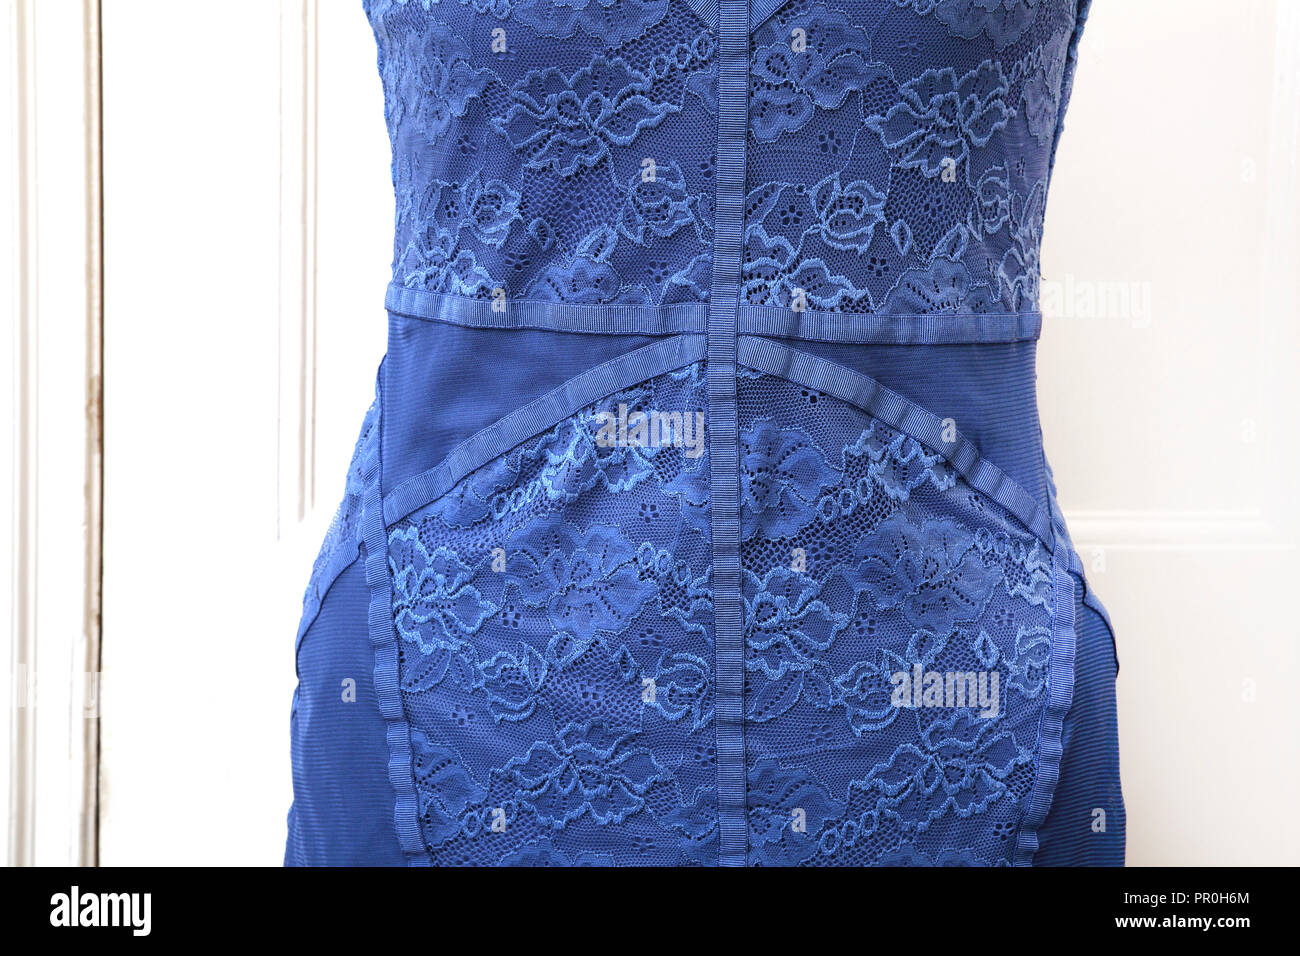 Blue Lace Sleeveless Evening Dress on Mannequin Stock Photo